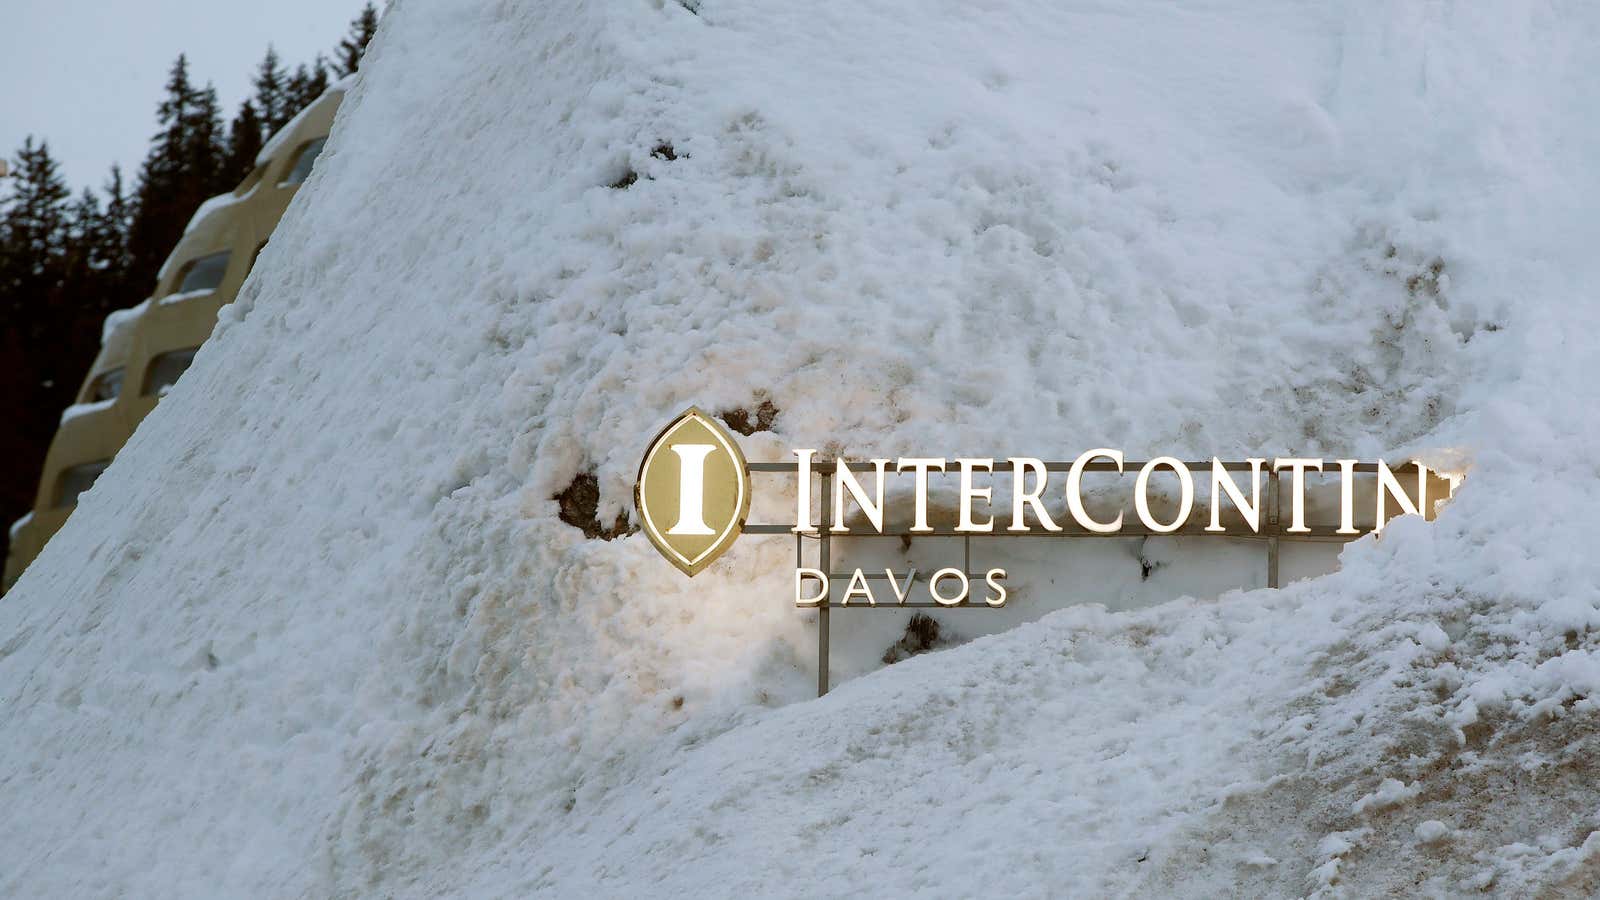 The president would have stayed at the Davos InterContinental.